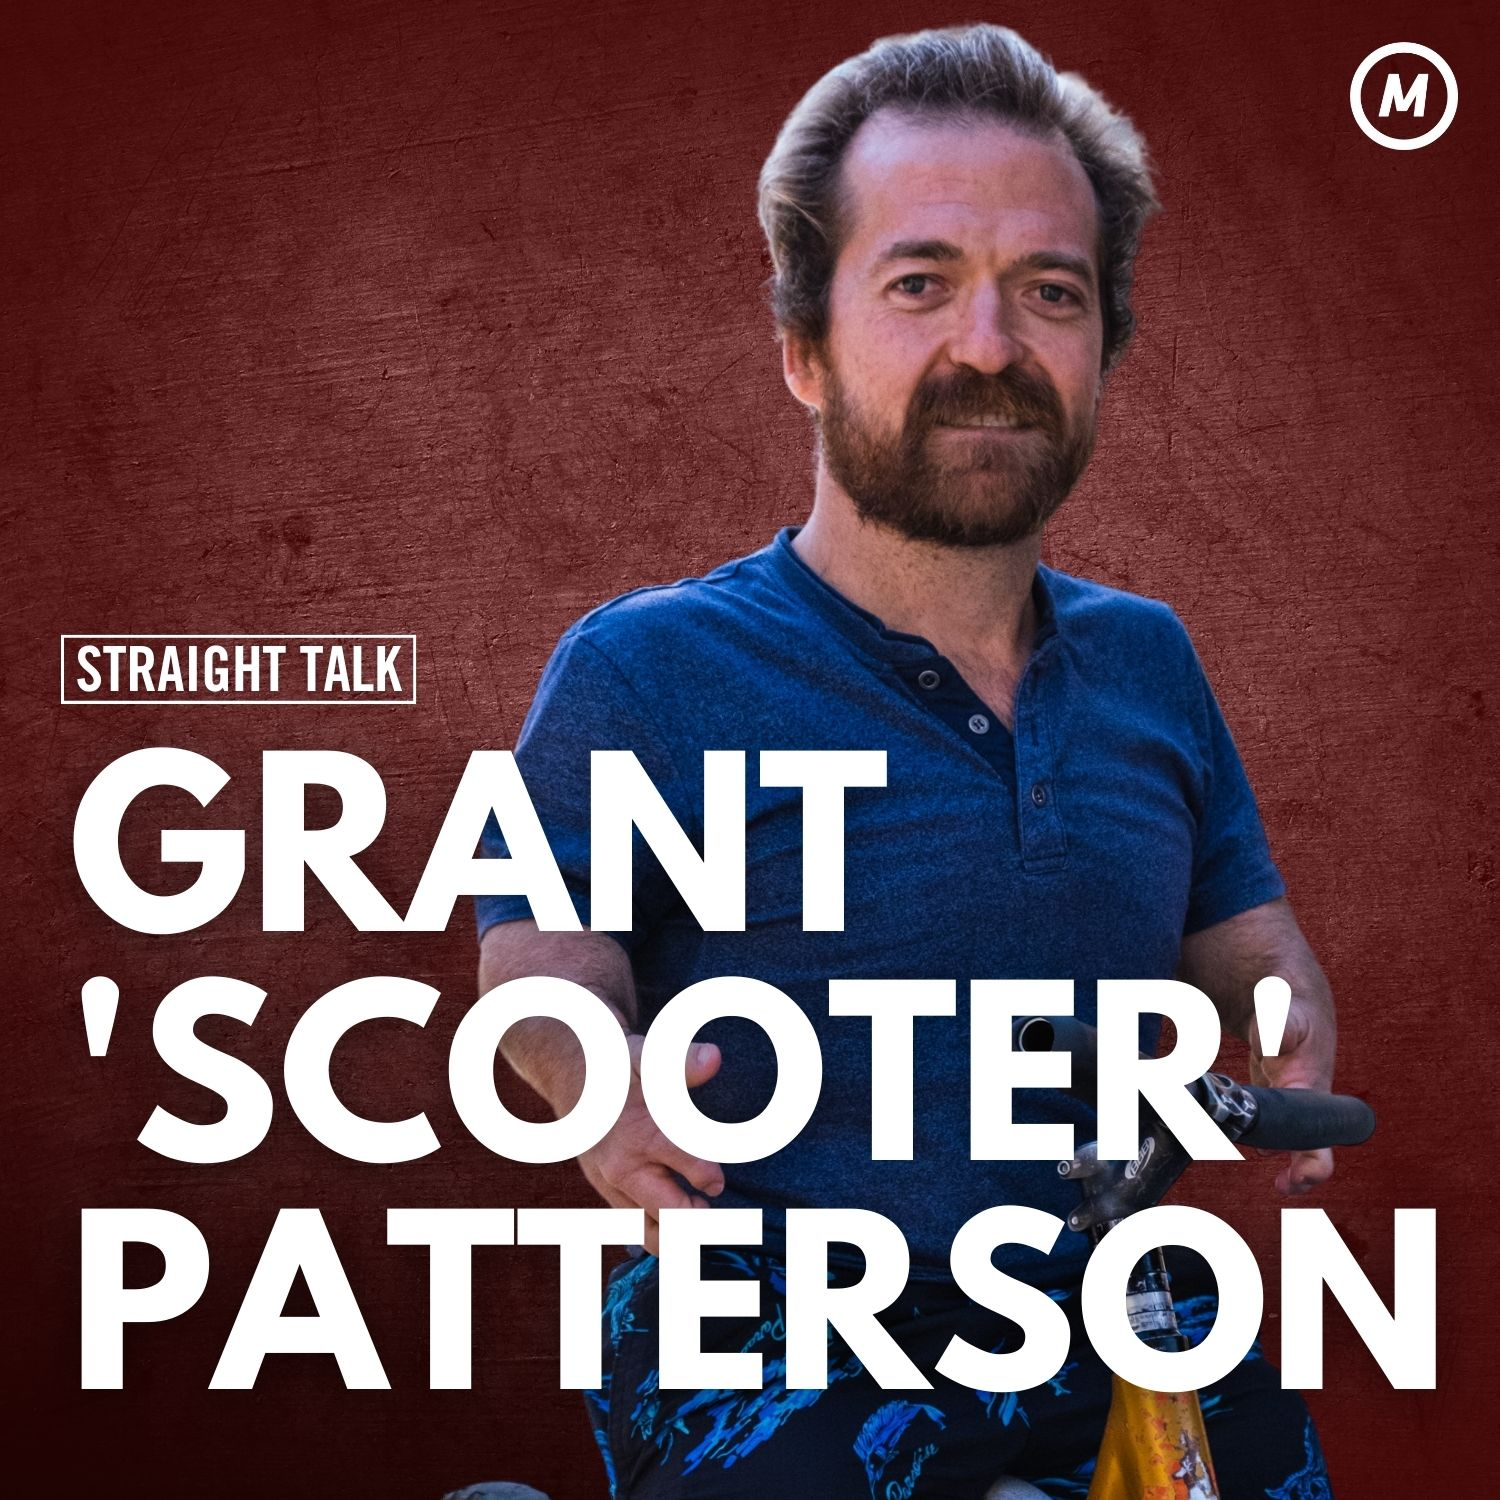 #39 Life is short so live it to its fullest with Grant "Scooter" Patterson